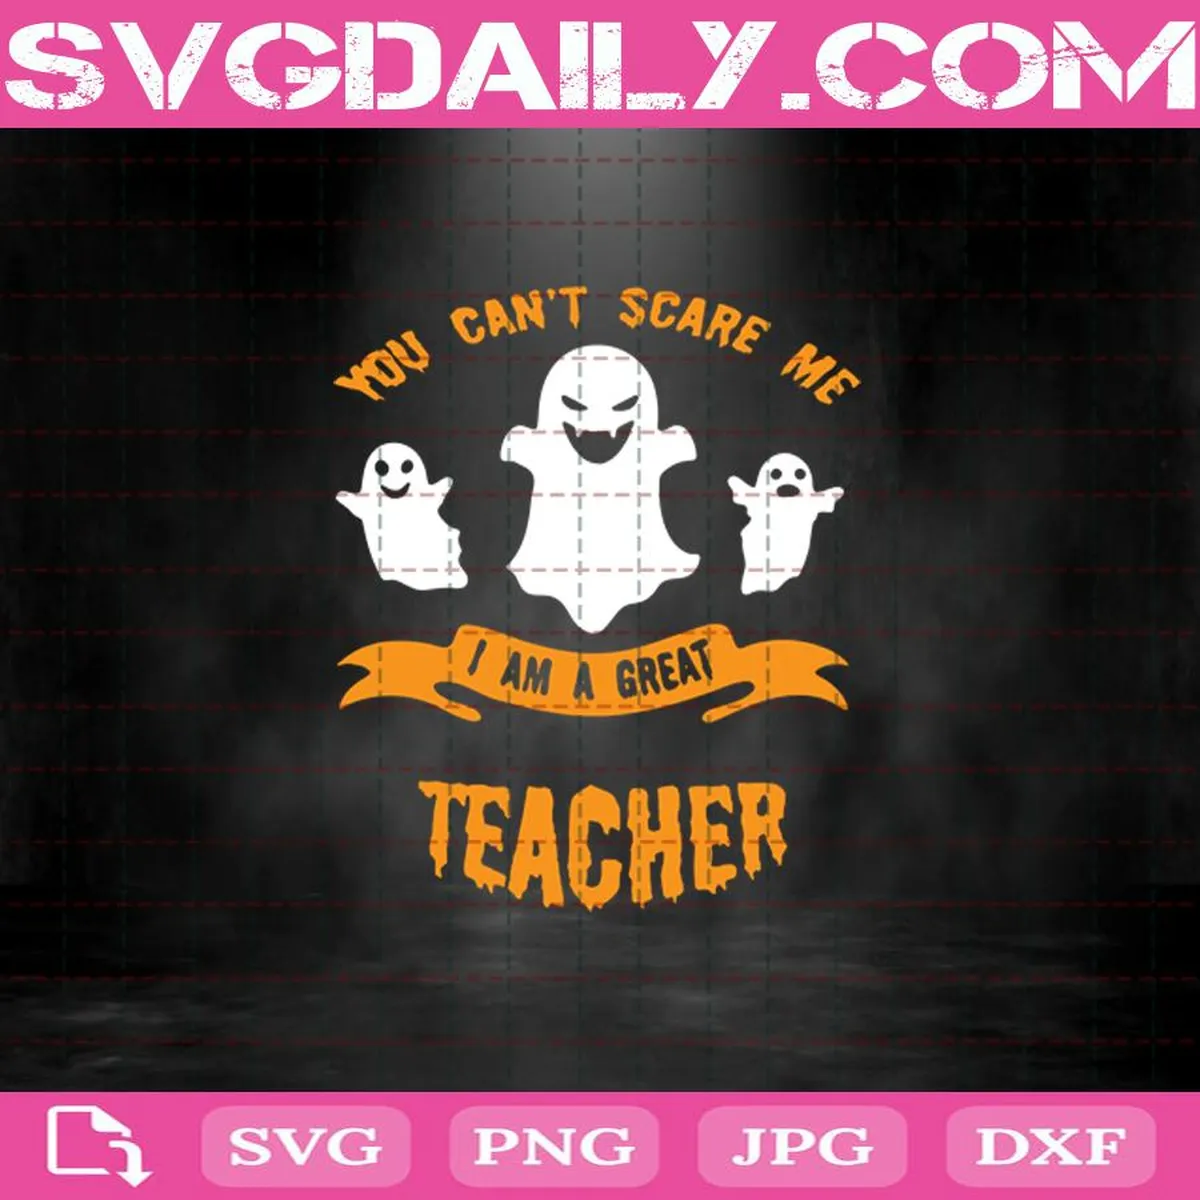 You Can’t Scare Me I Am A Great Teacher Boo Ghost Halloween Svg, Halloween Svg, Ghost Svg, Teacher Svg, Boo Ghost Svg